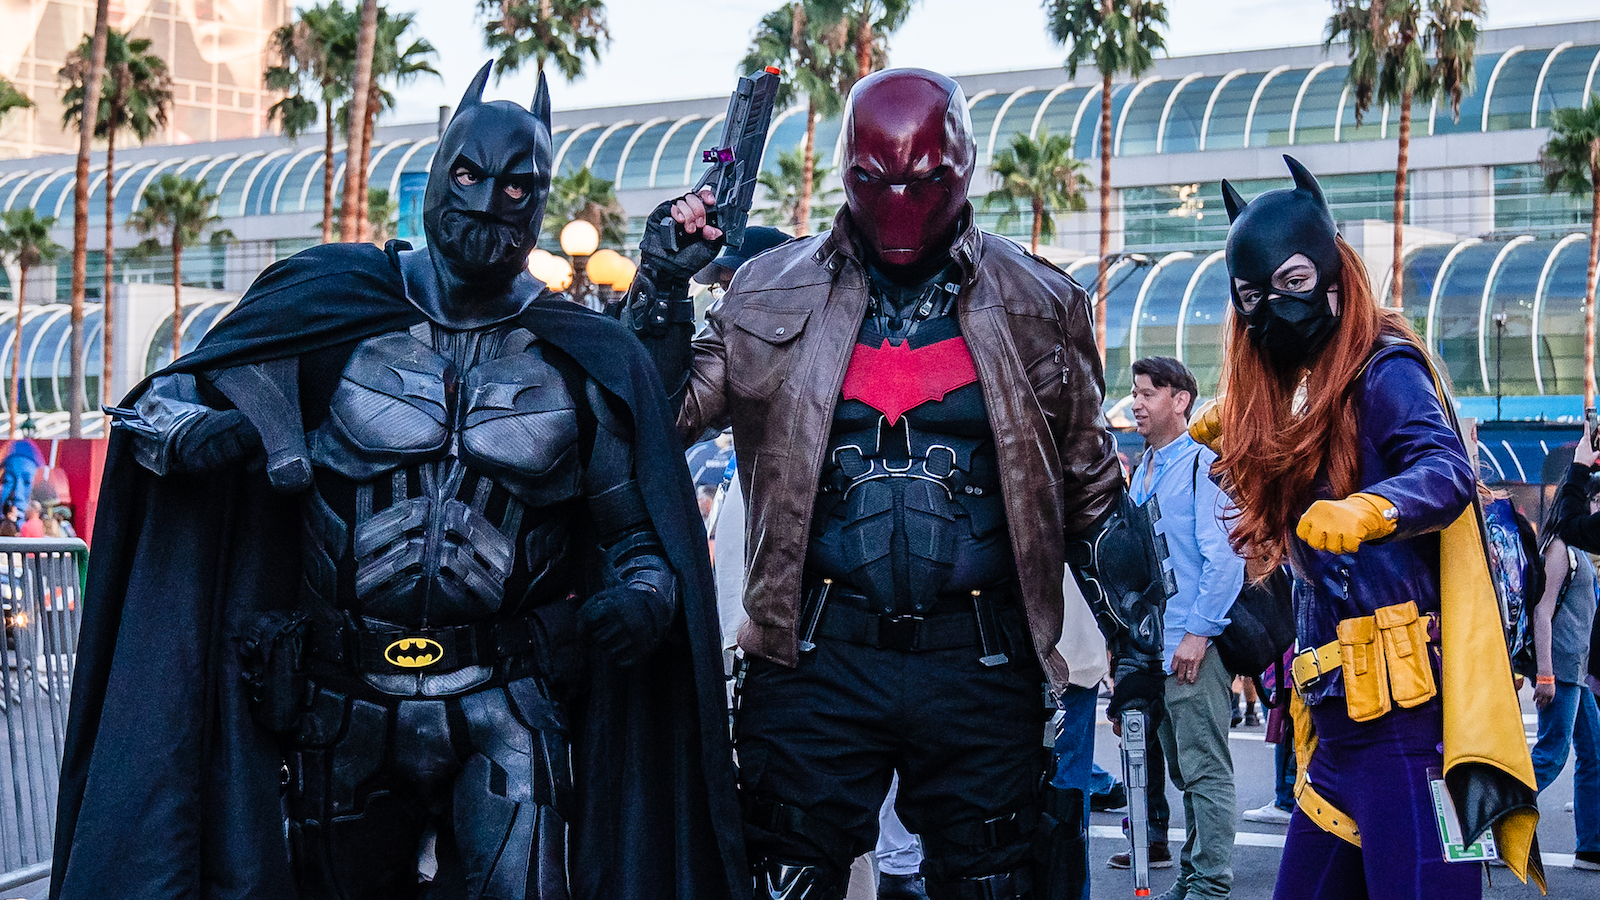 Where is the next comic-con being held?